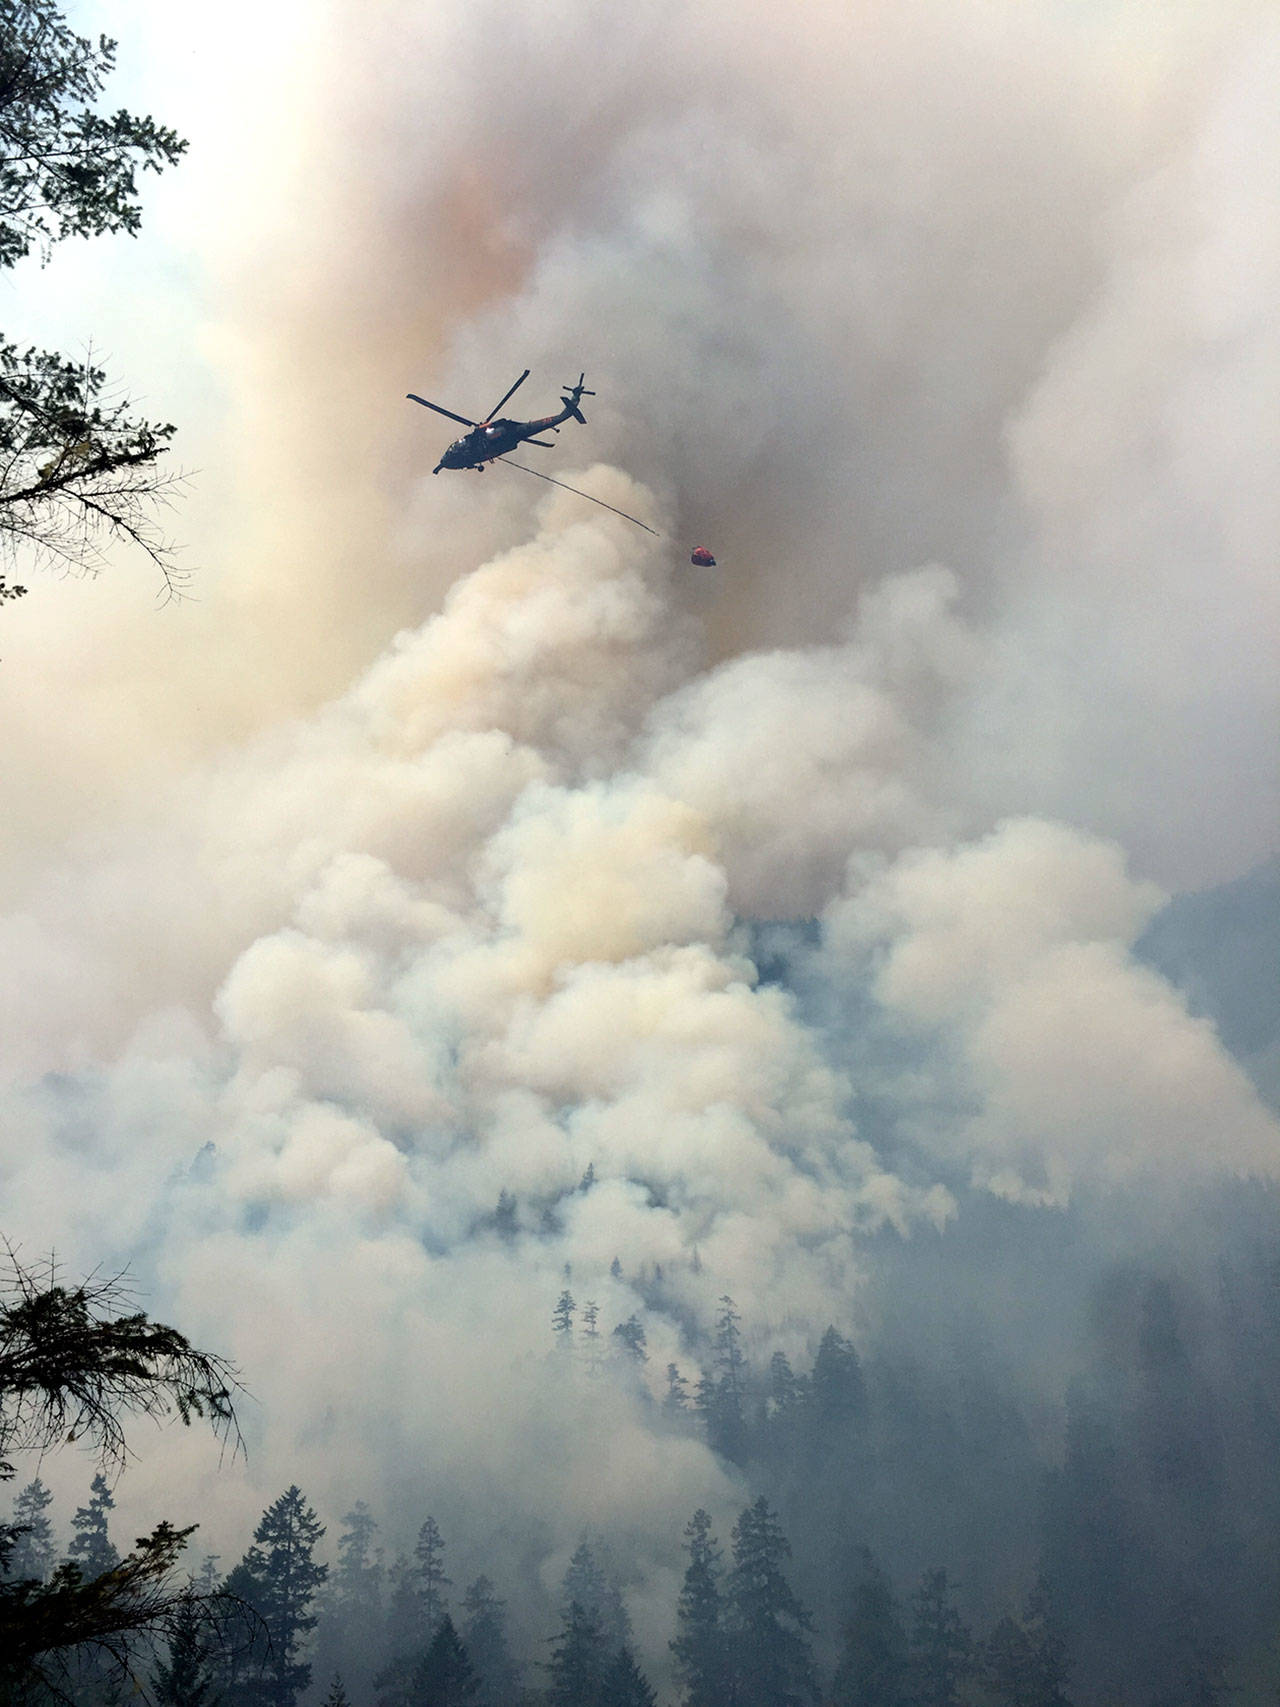 A National Guard helicopter doused the Maple Fire Tuesday. (Department of Natural Resources)